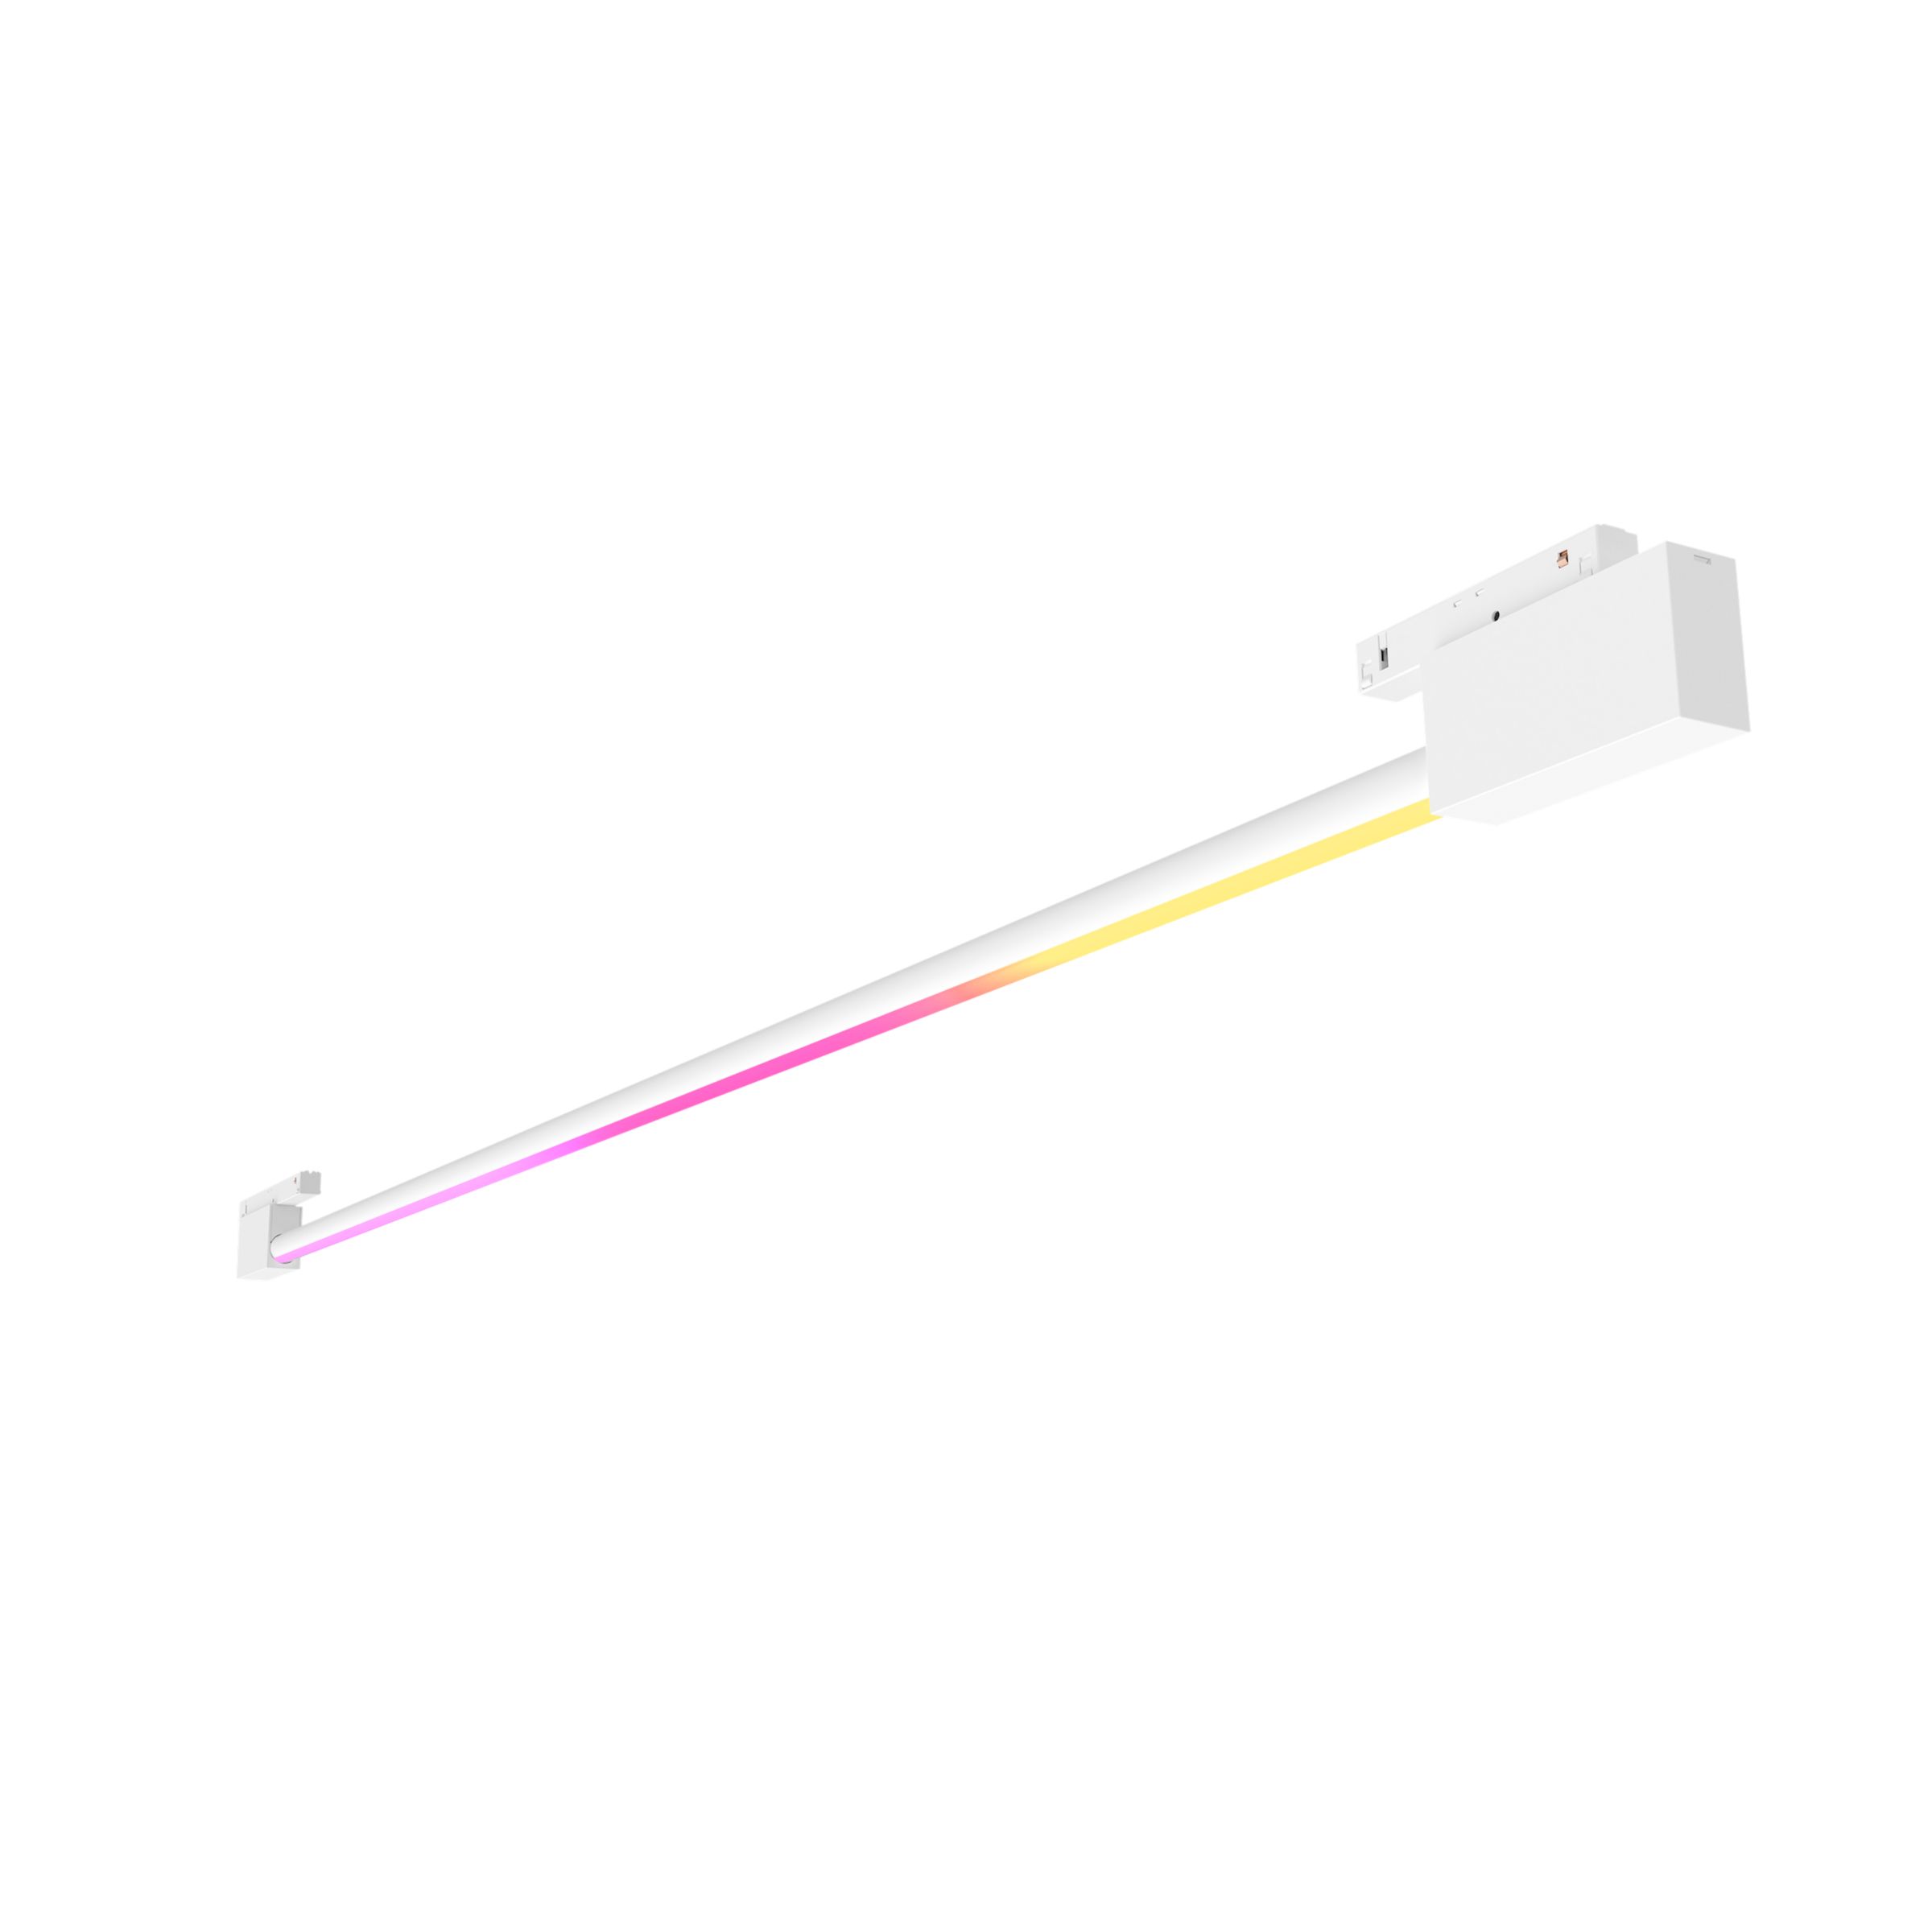 Hue White & Color Ambiance Perifo Gradient Light Tube groß weiß